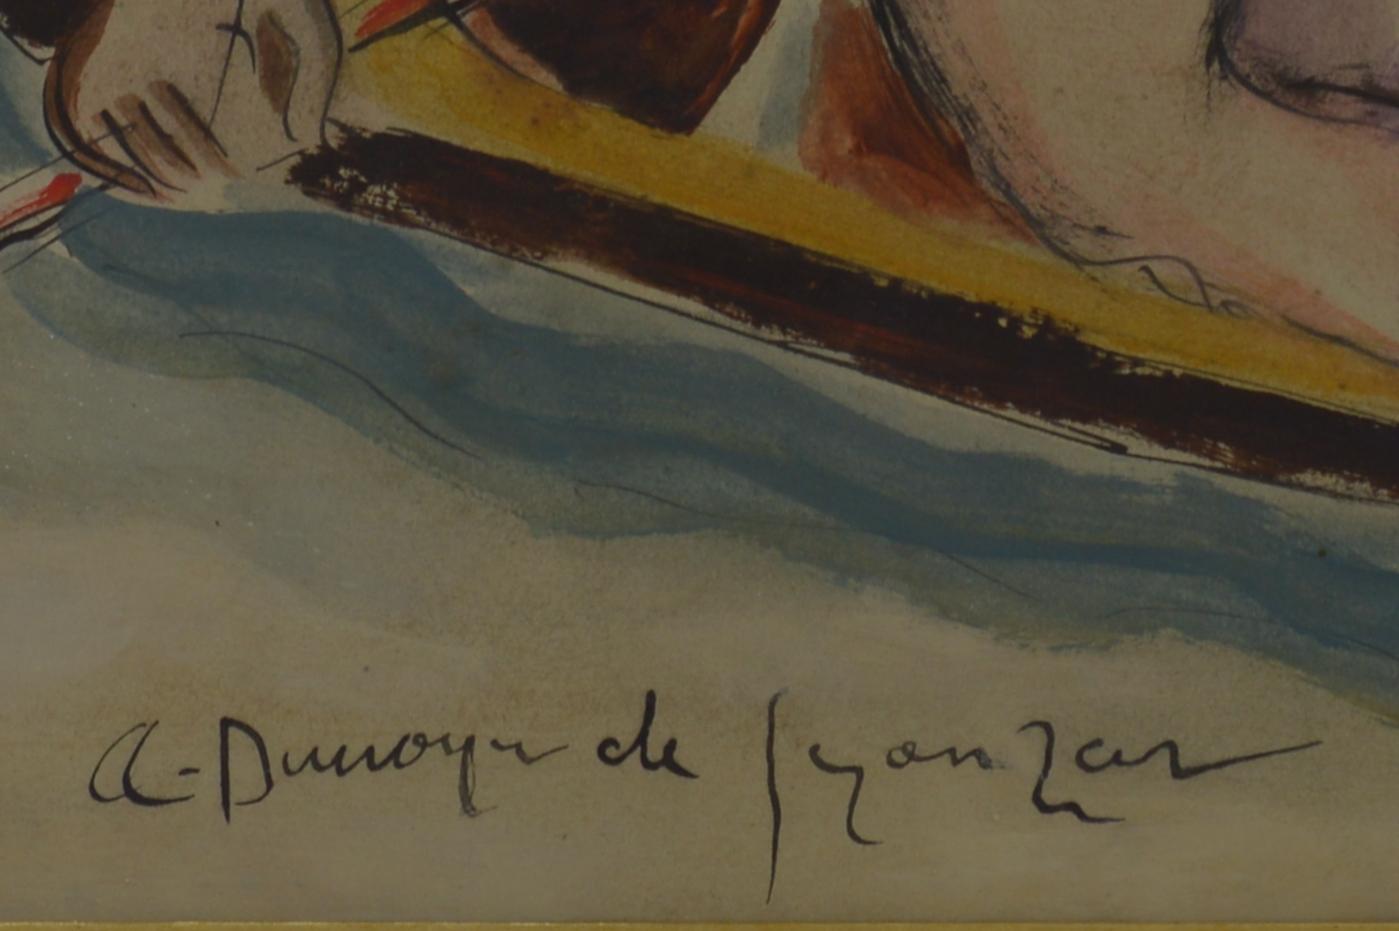 Pen, ink, watercolor and wash on paper by André Dunoyer de Segonzac, France, 1922-1924. Boating on the Morin River. Measurements : with frame: 52.5x65x2 cm - 20.7x25.6x0.8 inches / without frame: 36.5x45 cm -  14.4x17.7 inches. Signed lower left 